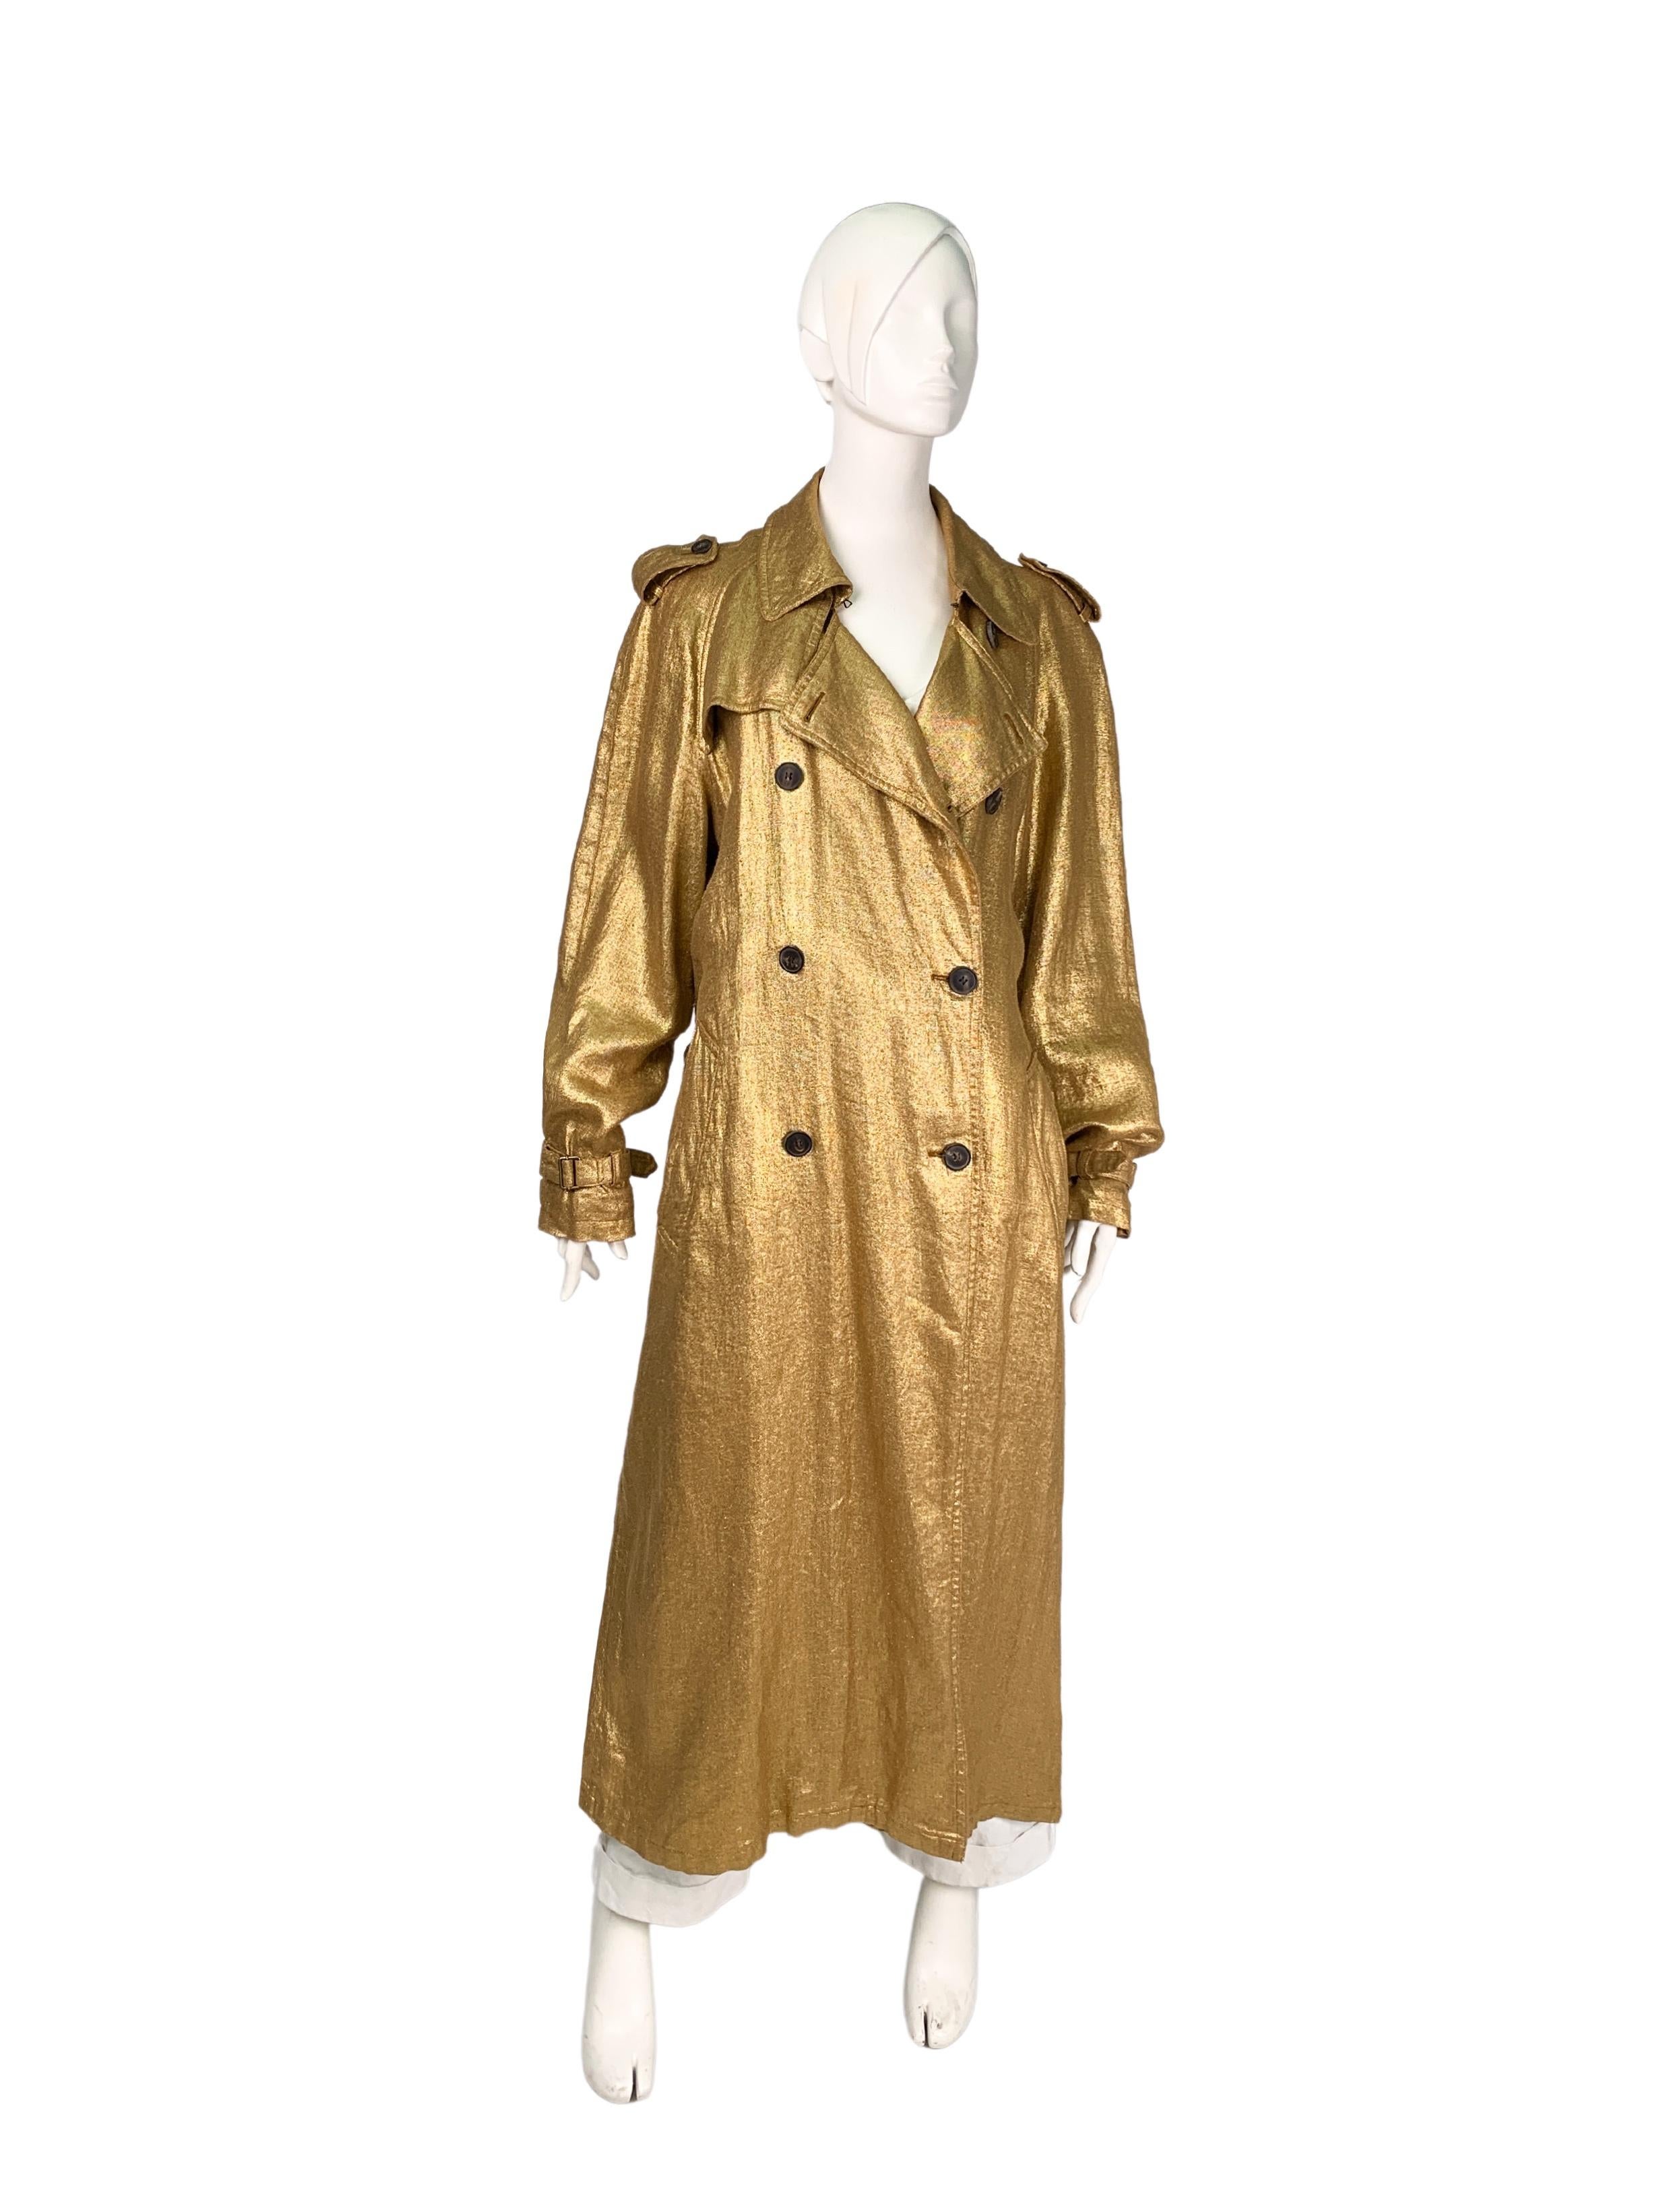 Dries Van Noten Metallic Gold Double-Breasted Belted Long Trench Coat, Unisex For Sale 6